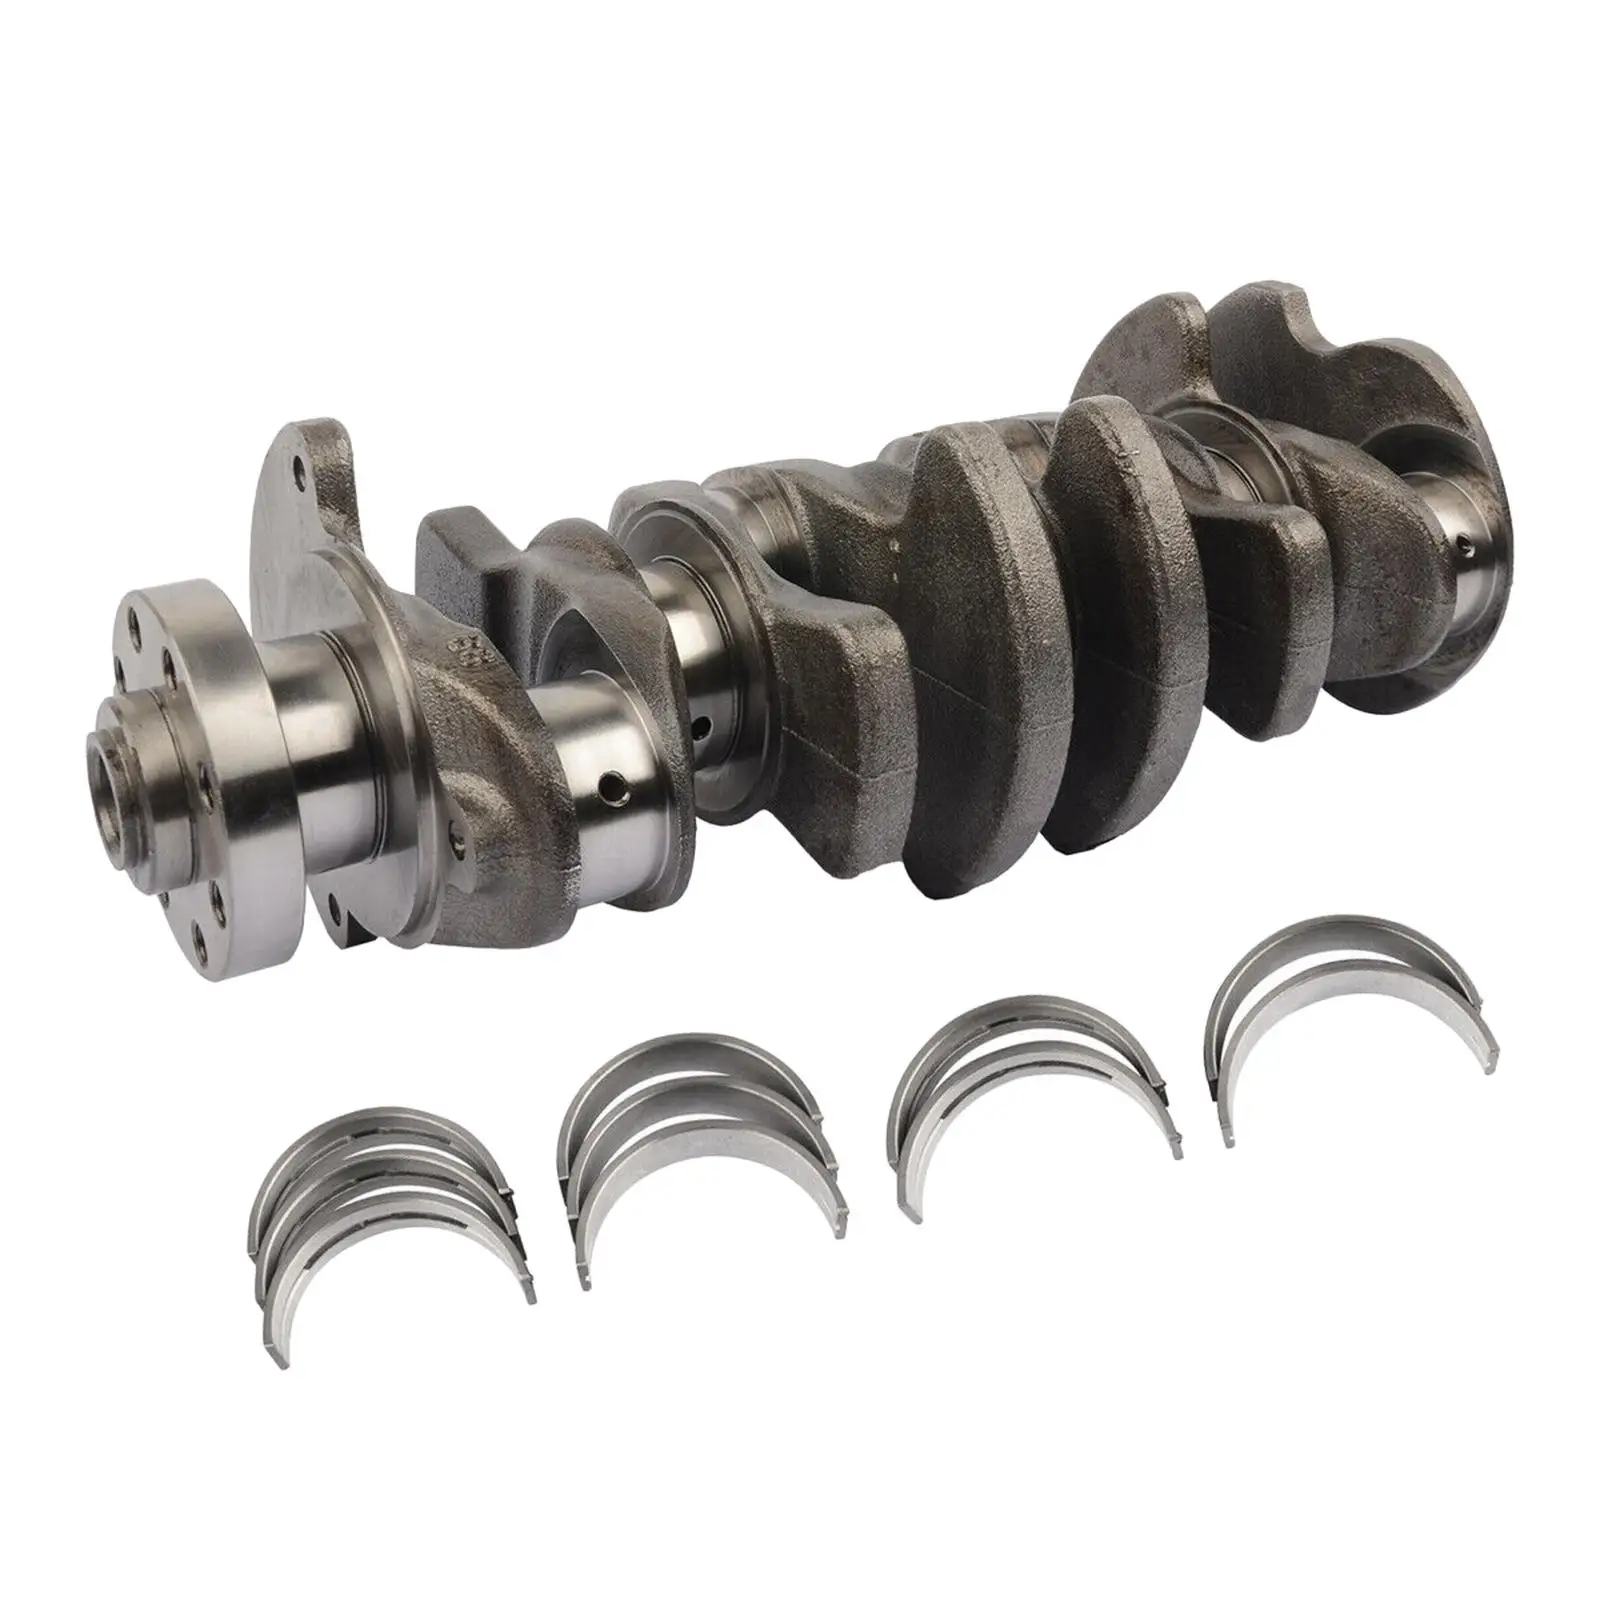 Engine Crankshaft 06L105101D Metal Directly Replace Easy Installation High Performance for Audi A4 A5 TT Tts A6 A7 A1 A3